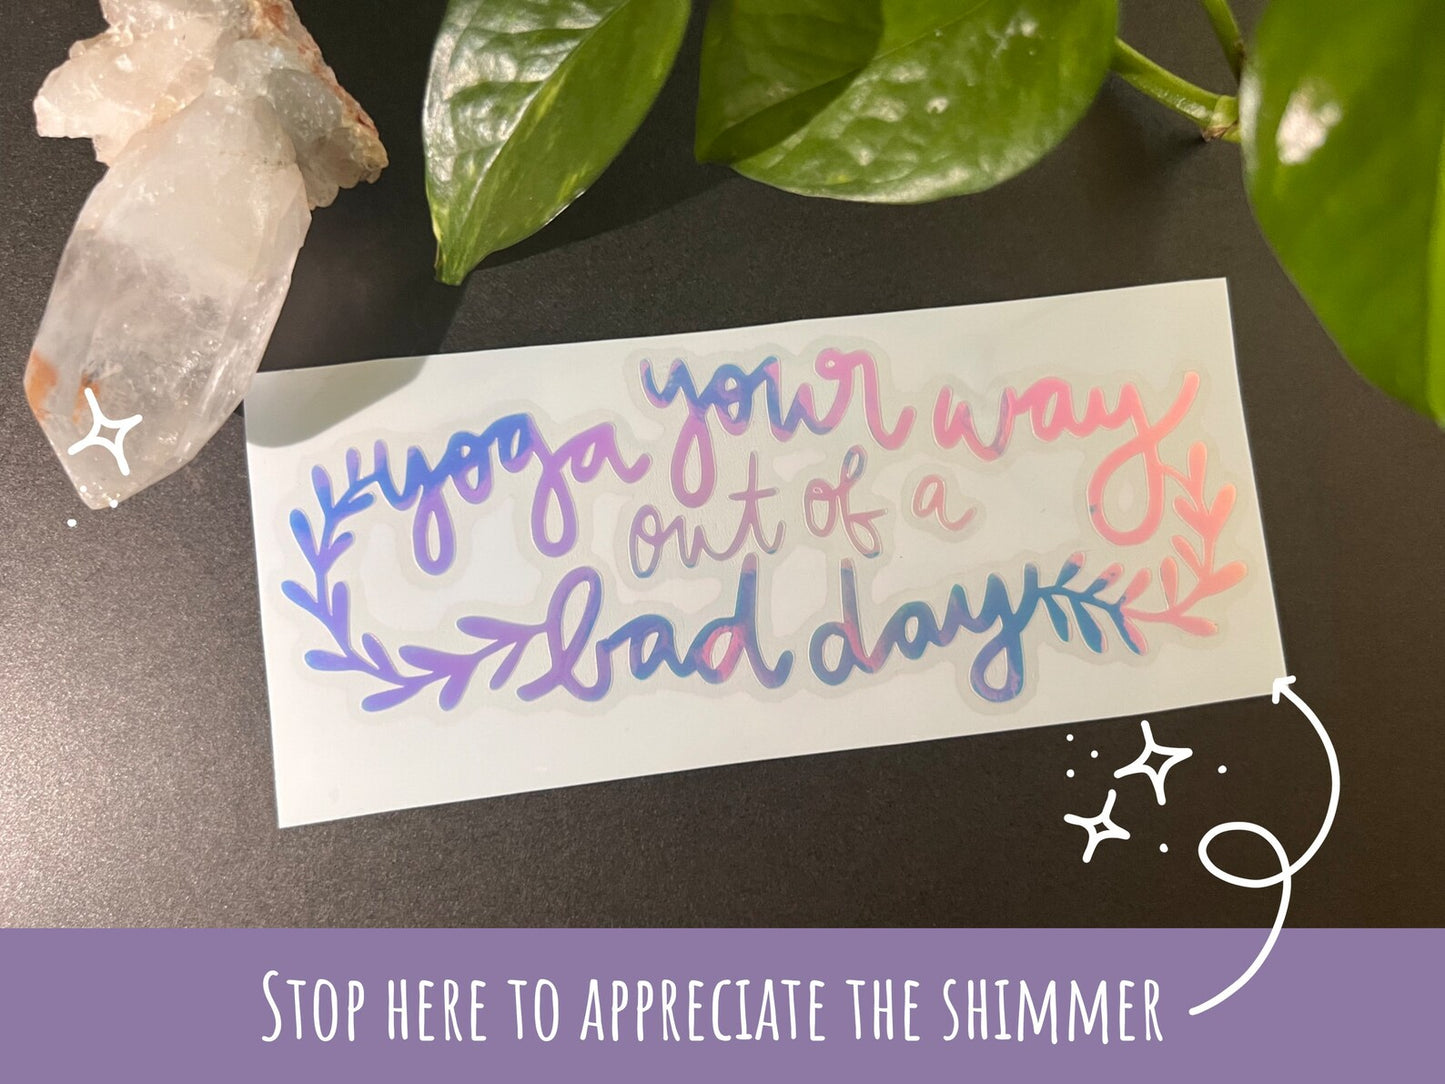 Yoga Your Way out of a Bad Day - Mood Boosting Vinyl Sticker in Opal Shimmer